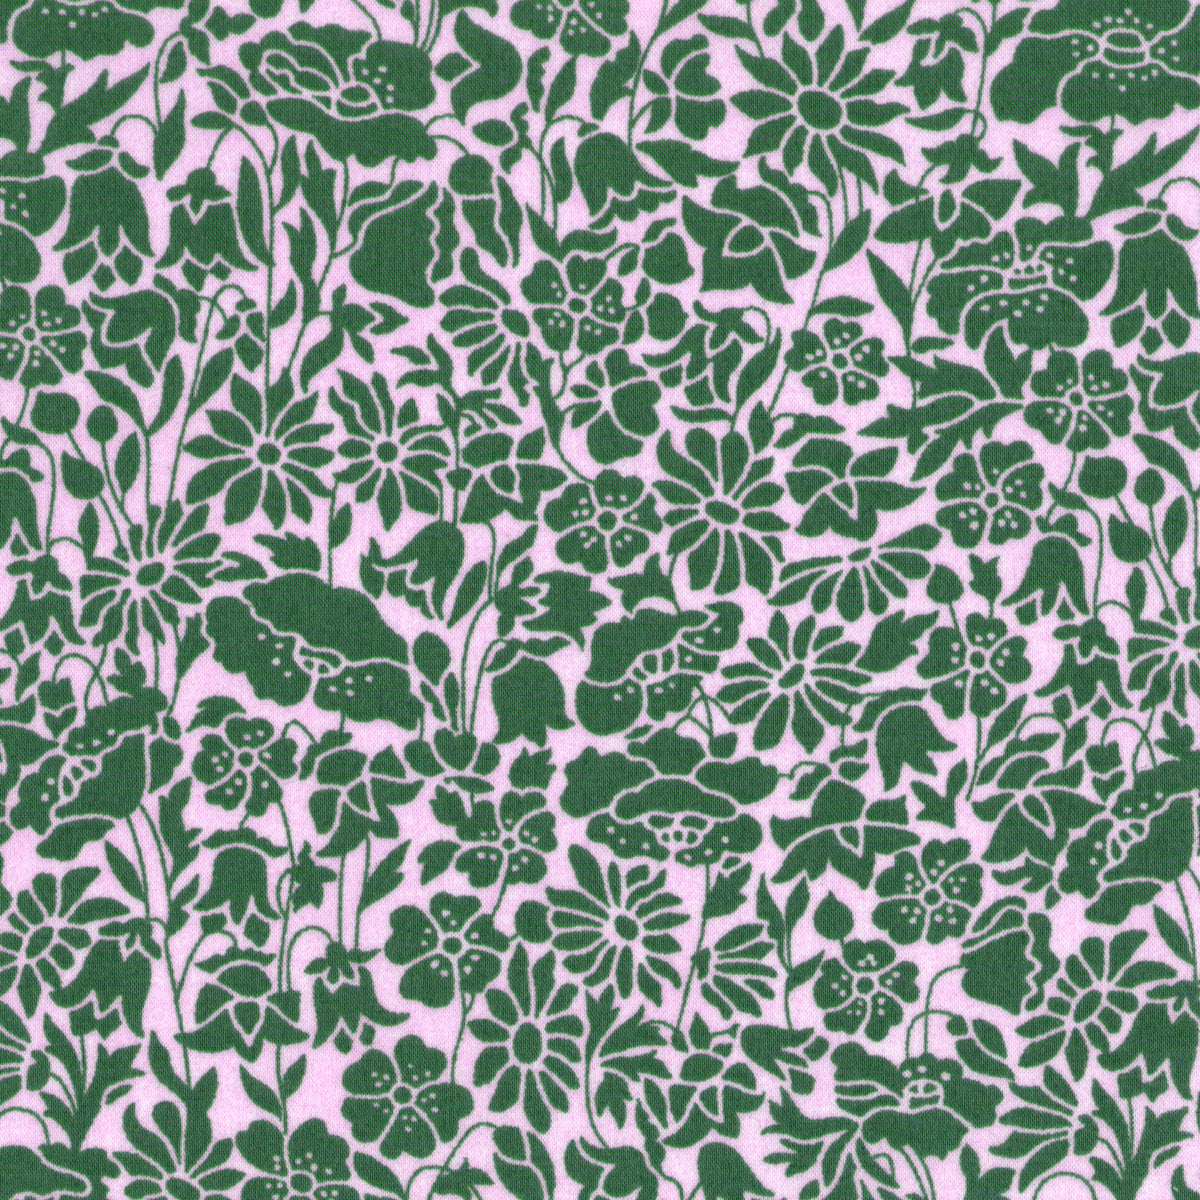 Made-to-Order Fabric in Green/Rose Poppy Day Liberty Fabric